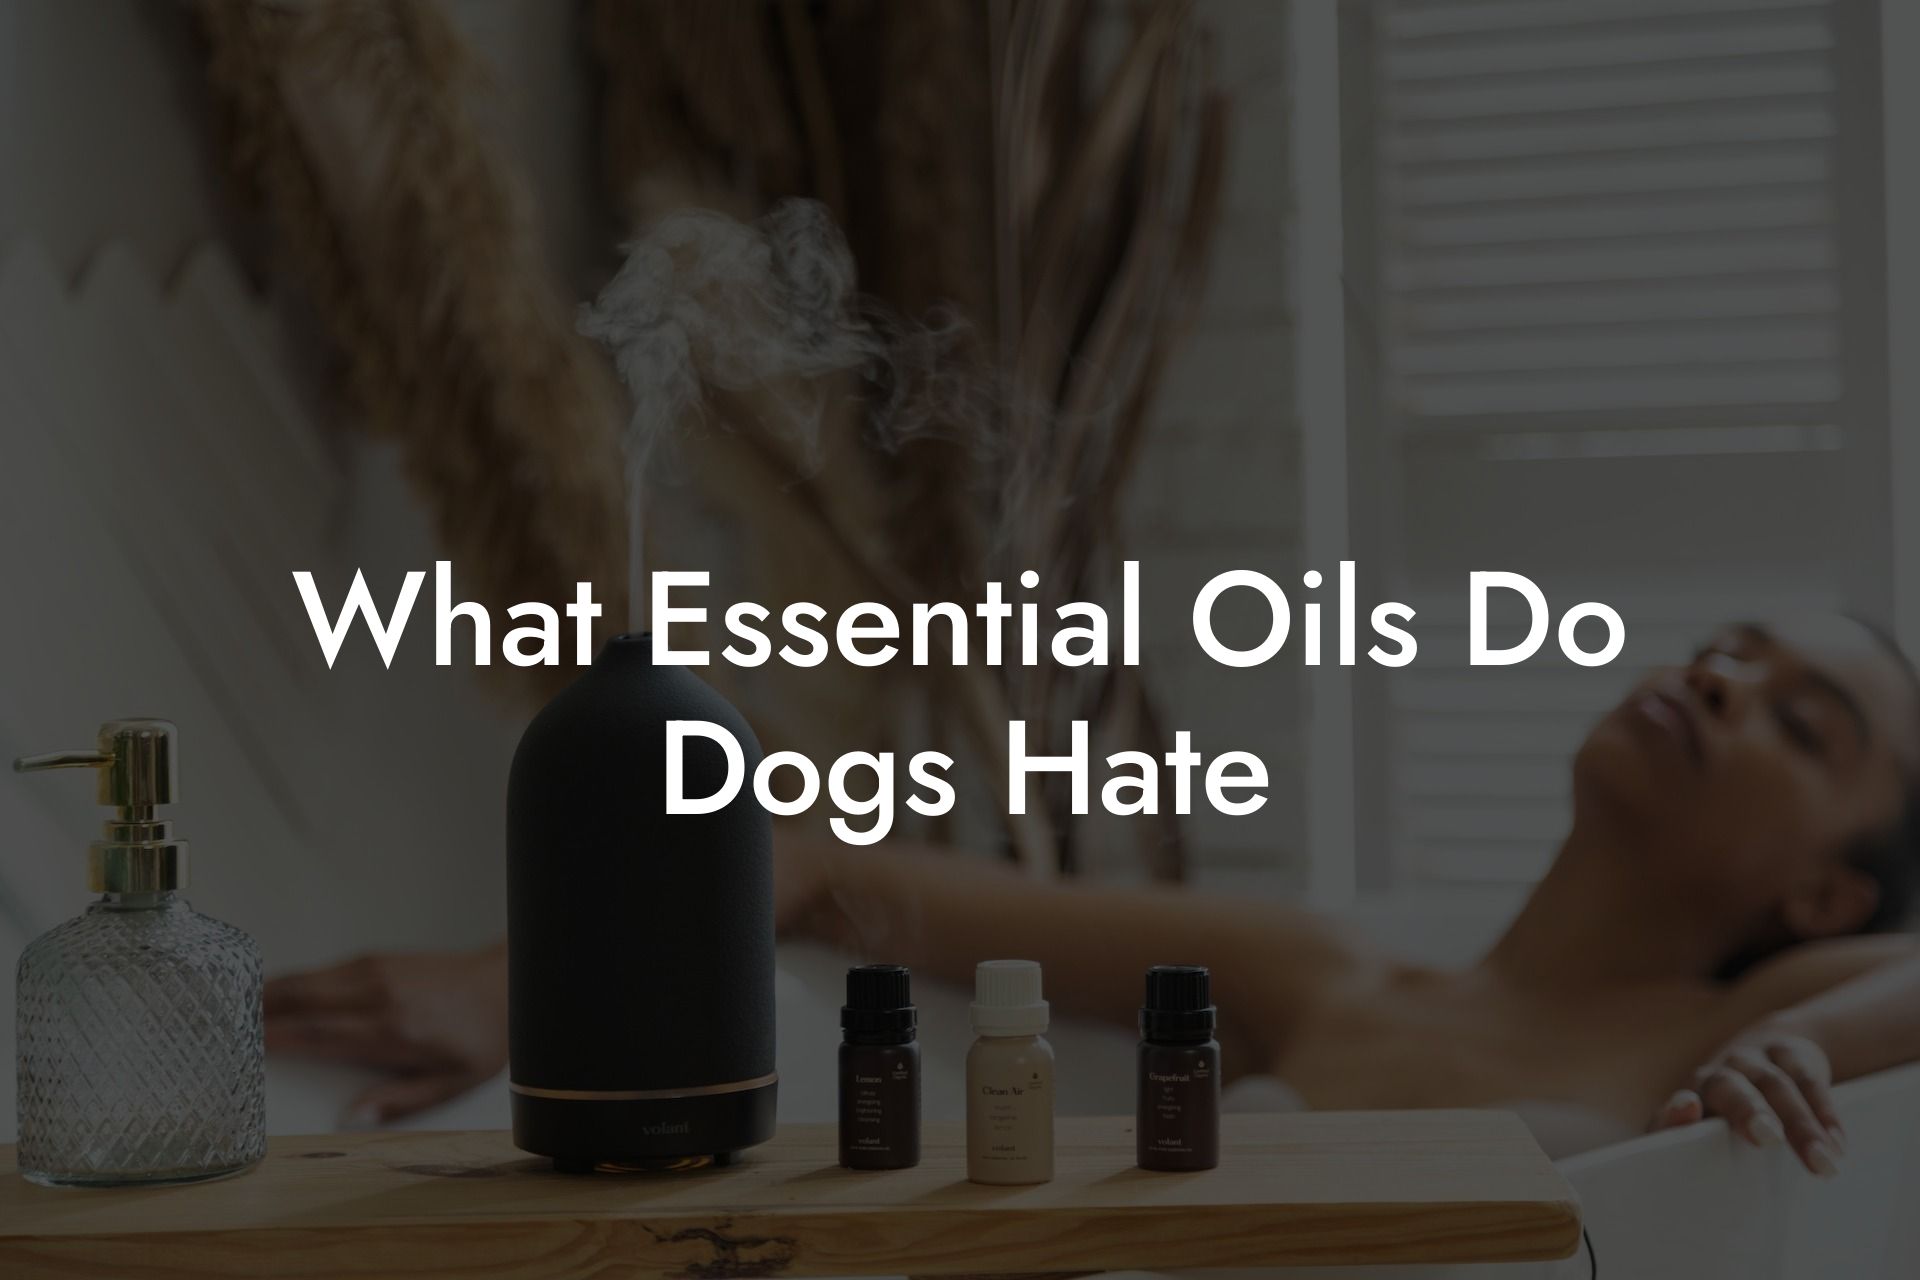 What Essential Oils Do Dogs Hate